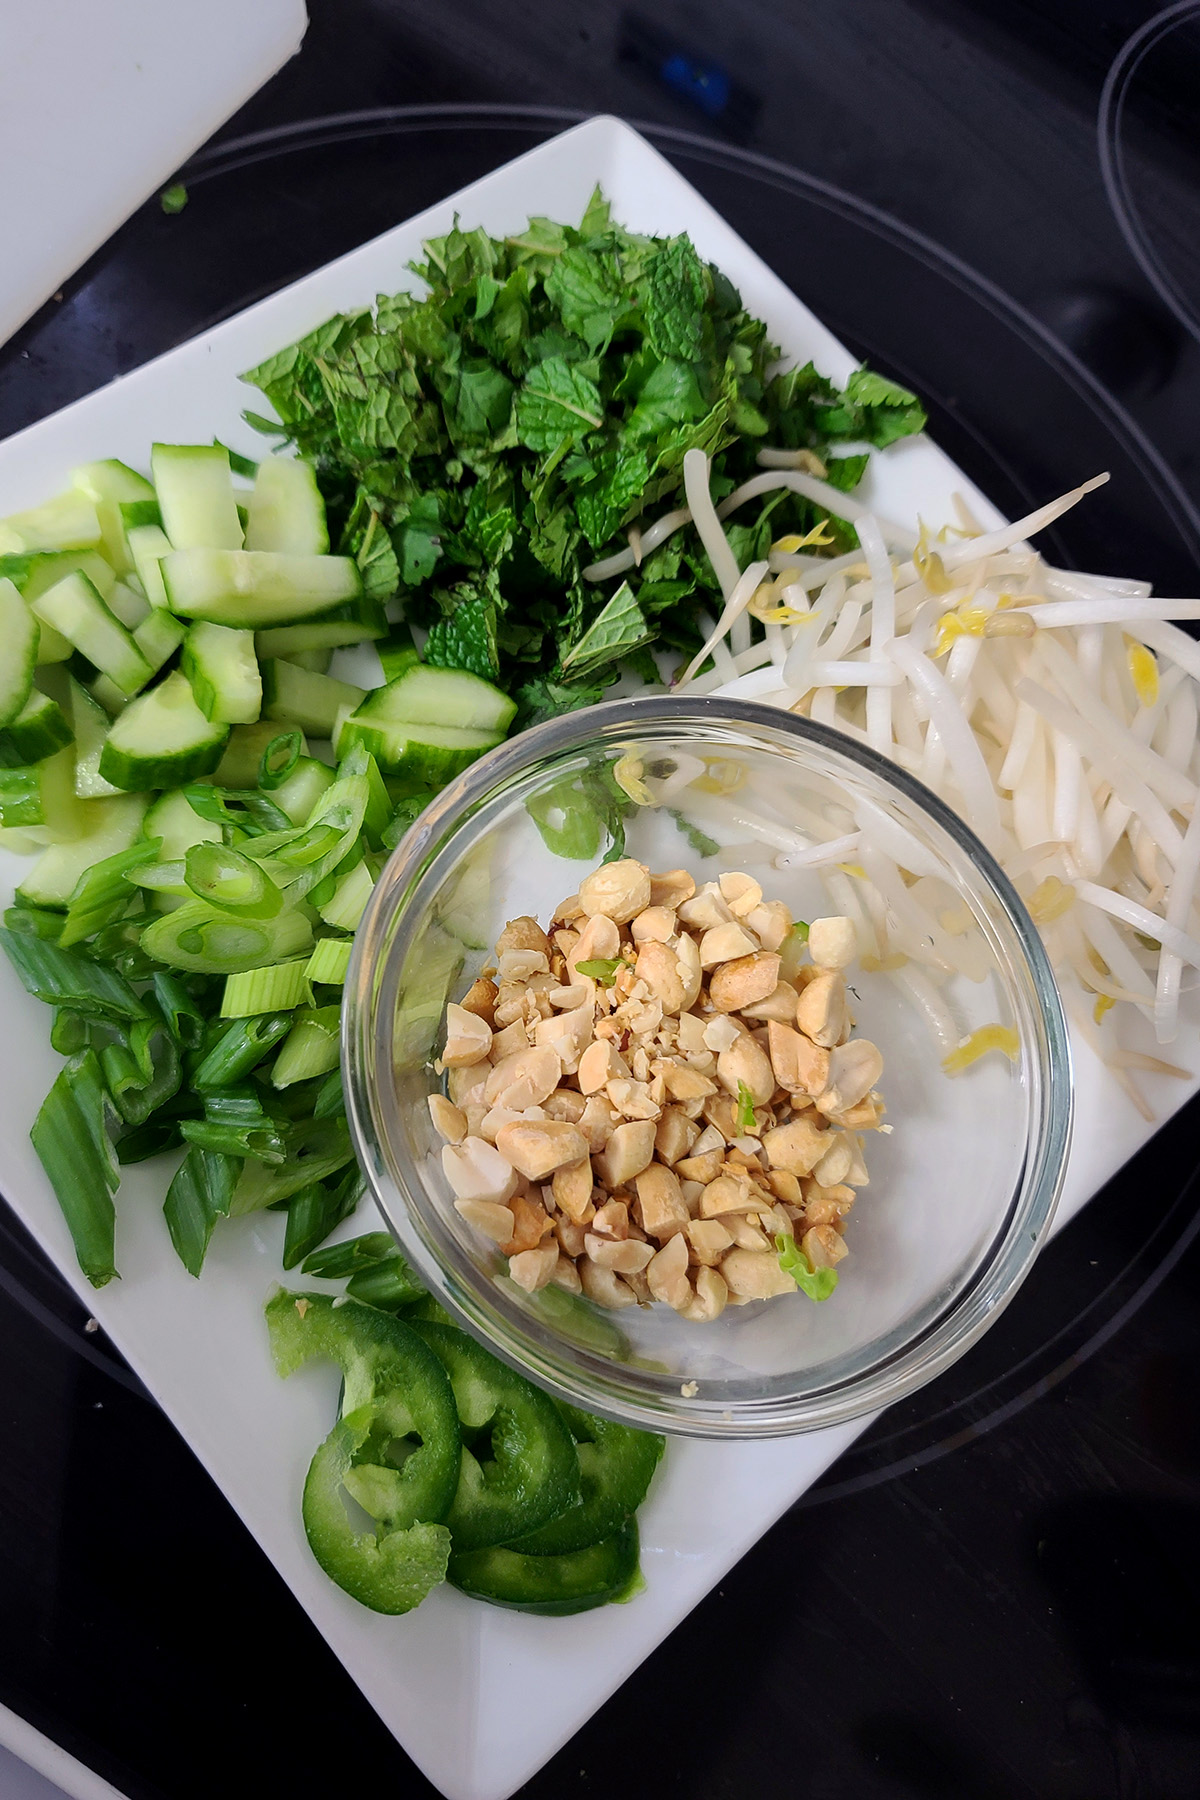 A plate with cilantro and mint, green onions, cucumber slices, washed bean sprouts, jalapeno slices, and chopped peanuts on it.